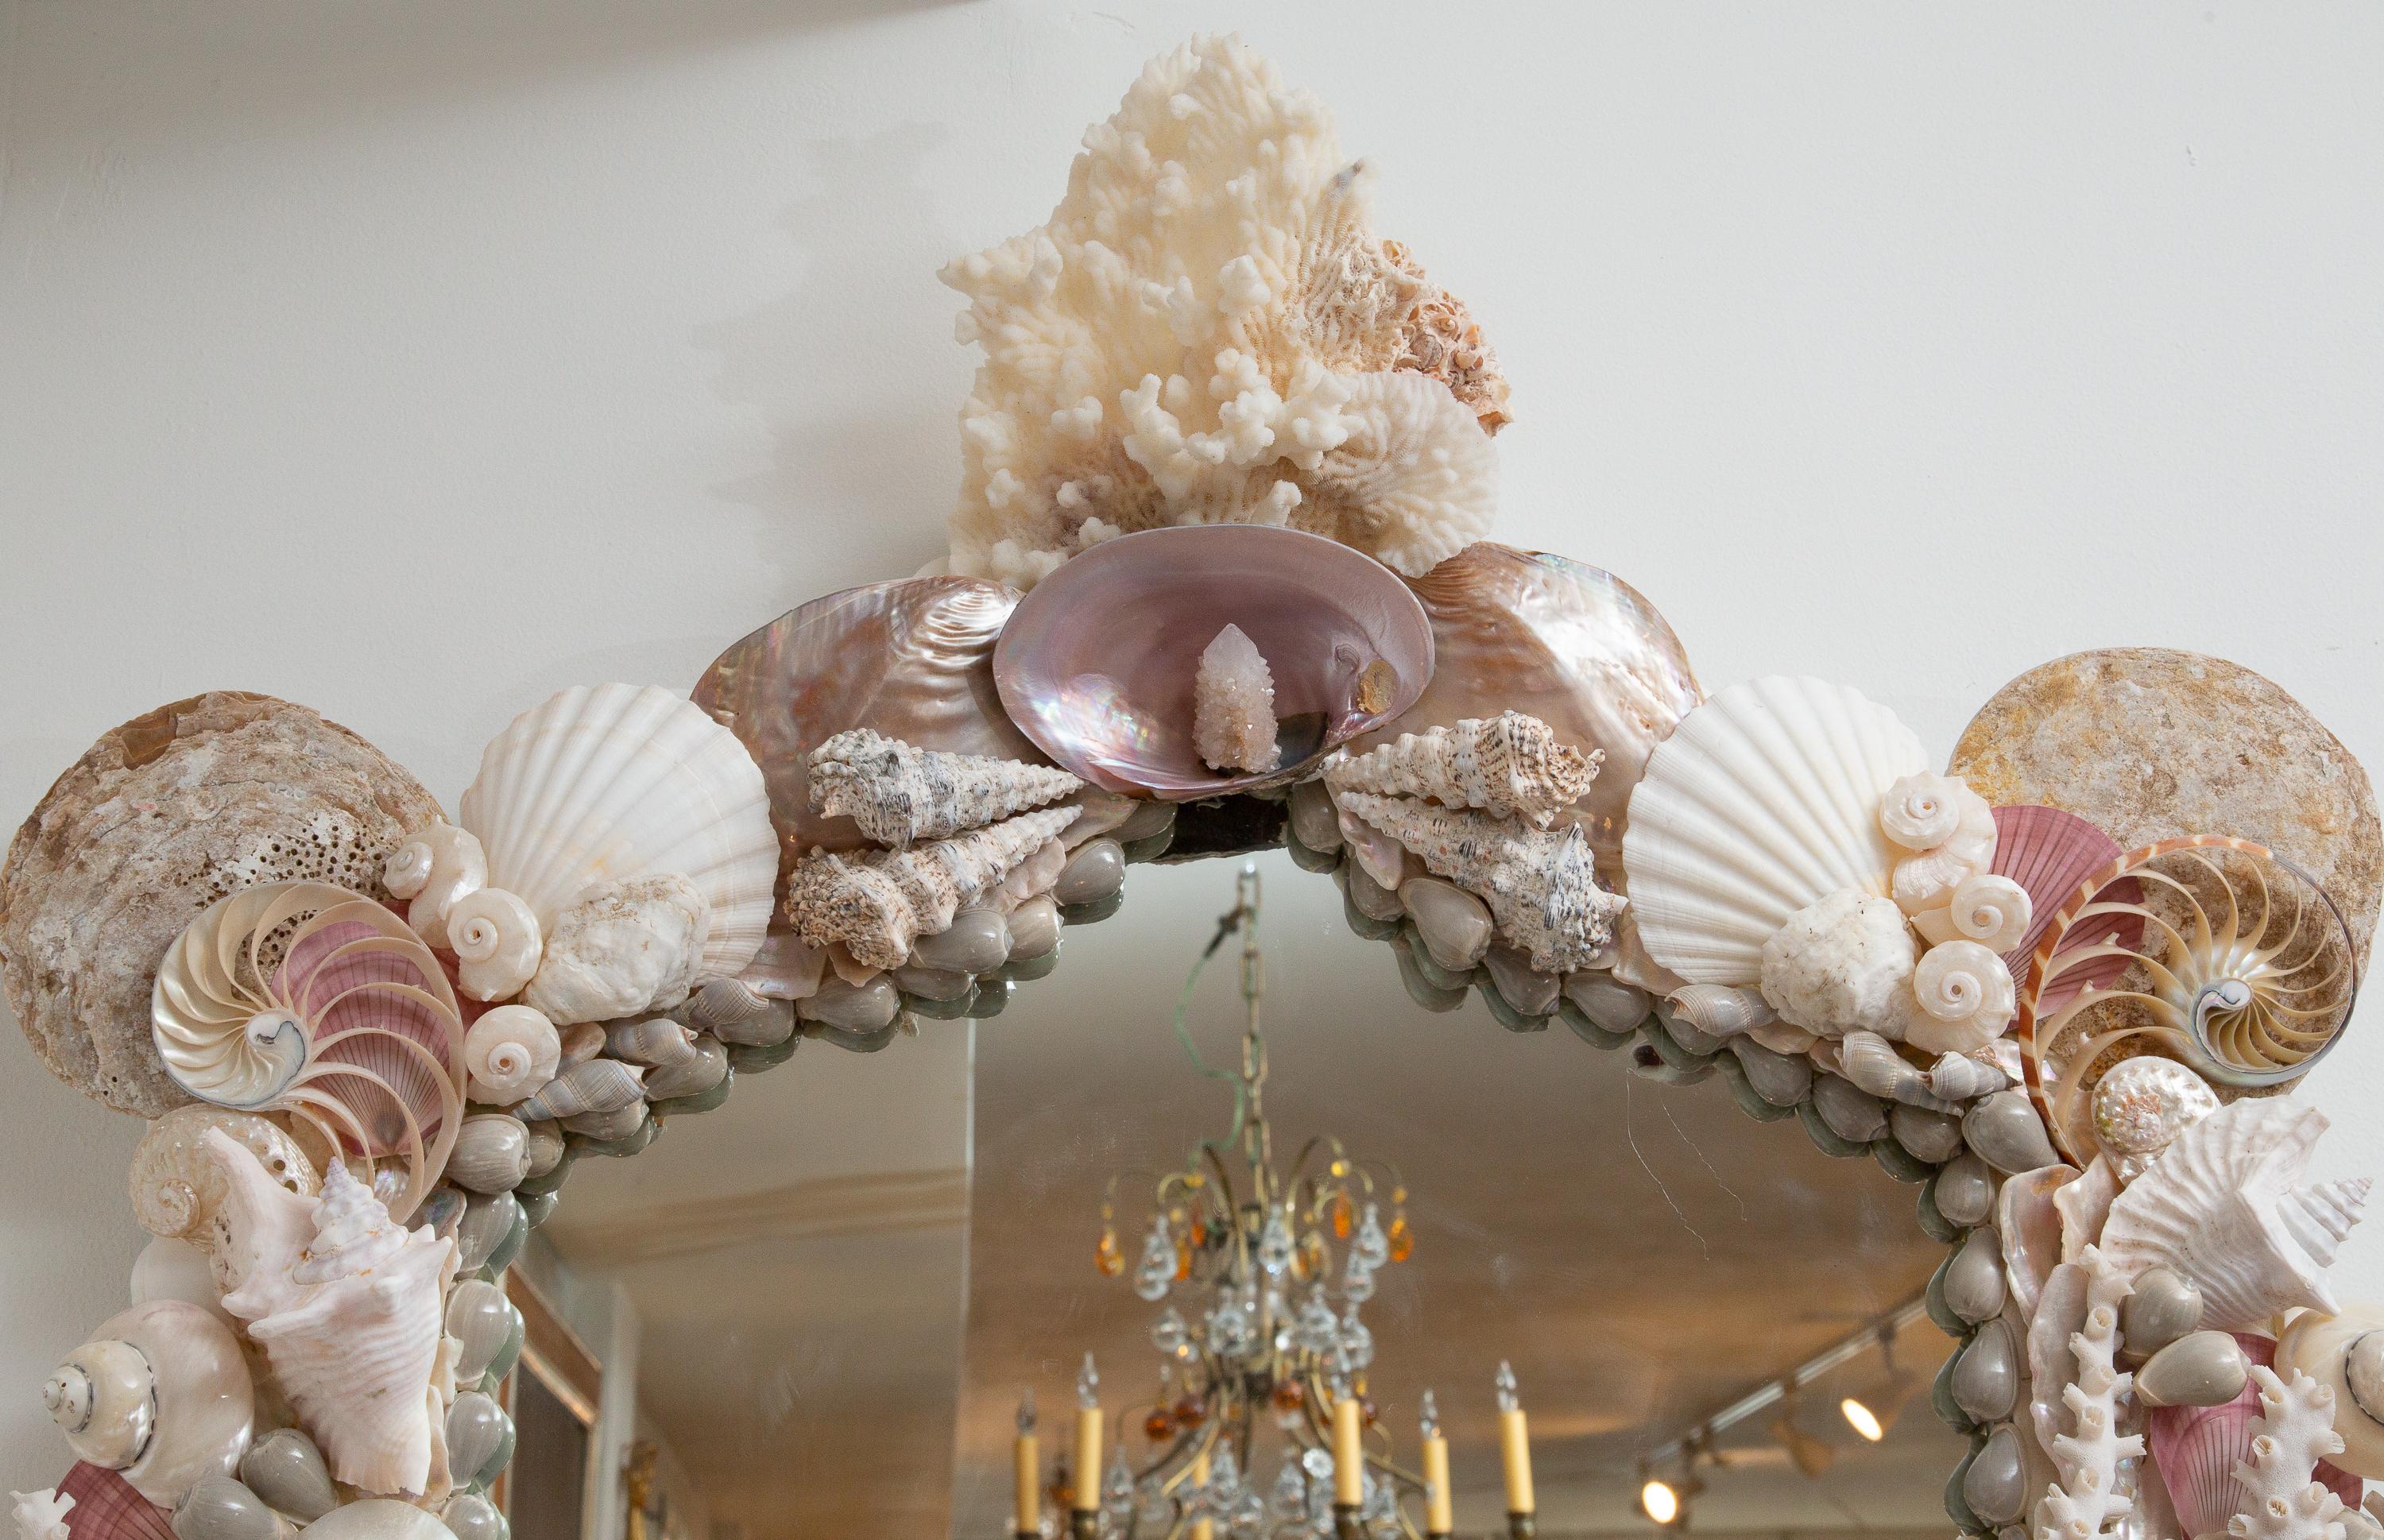 This is a unique mirror with an arching cornice. This custom mirror is composed of a variety of exquisite shells.